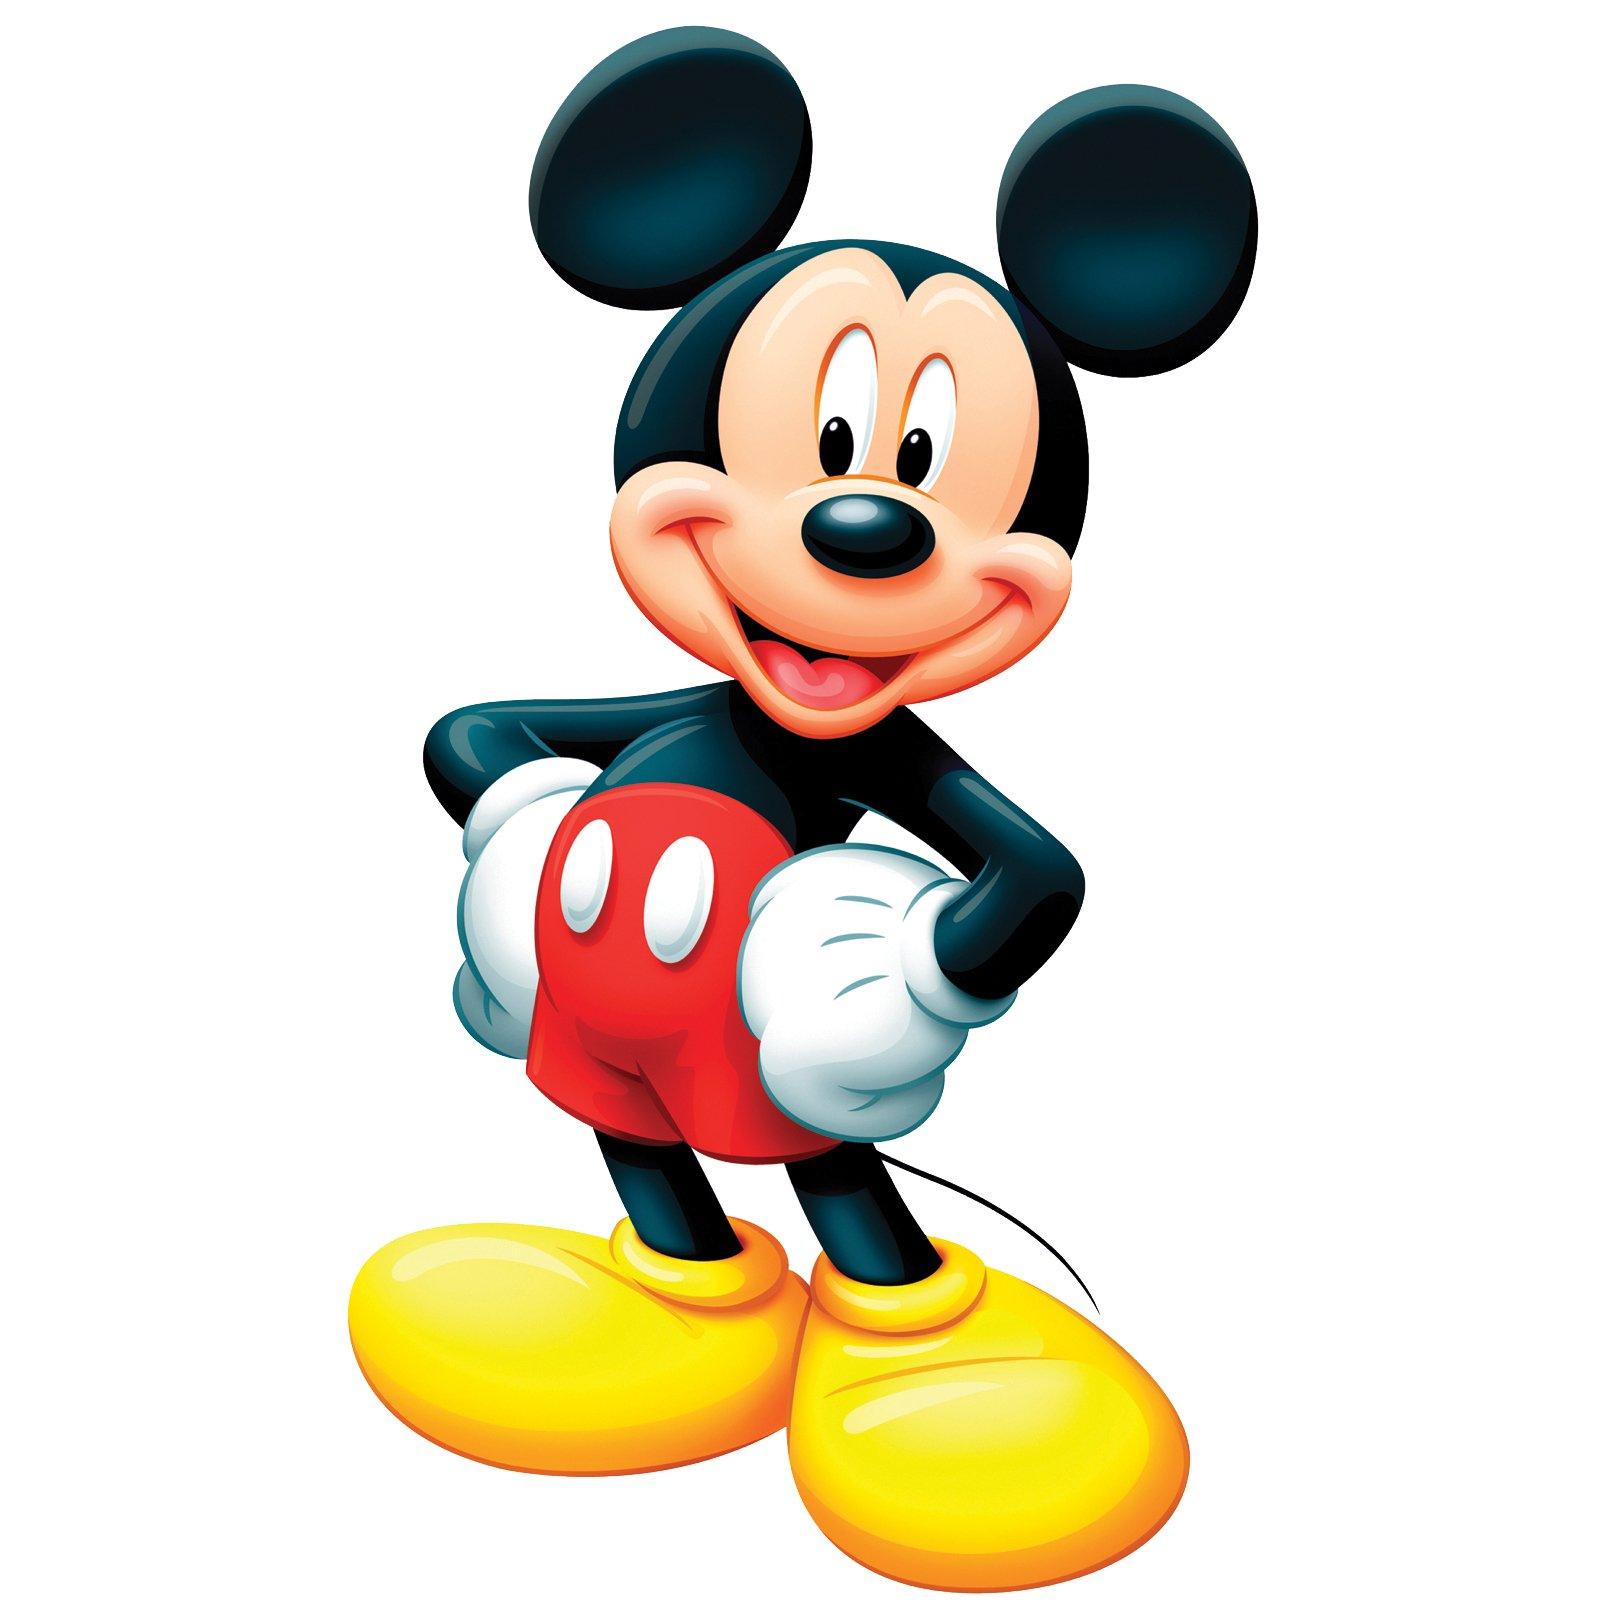 Mickey mouse birthday picture wallpaper welcometorust clip art